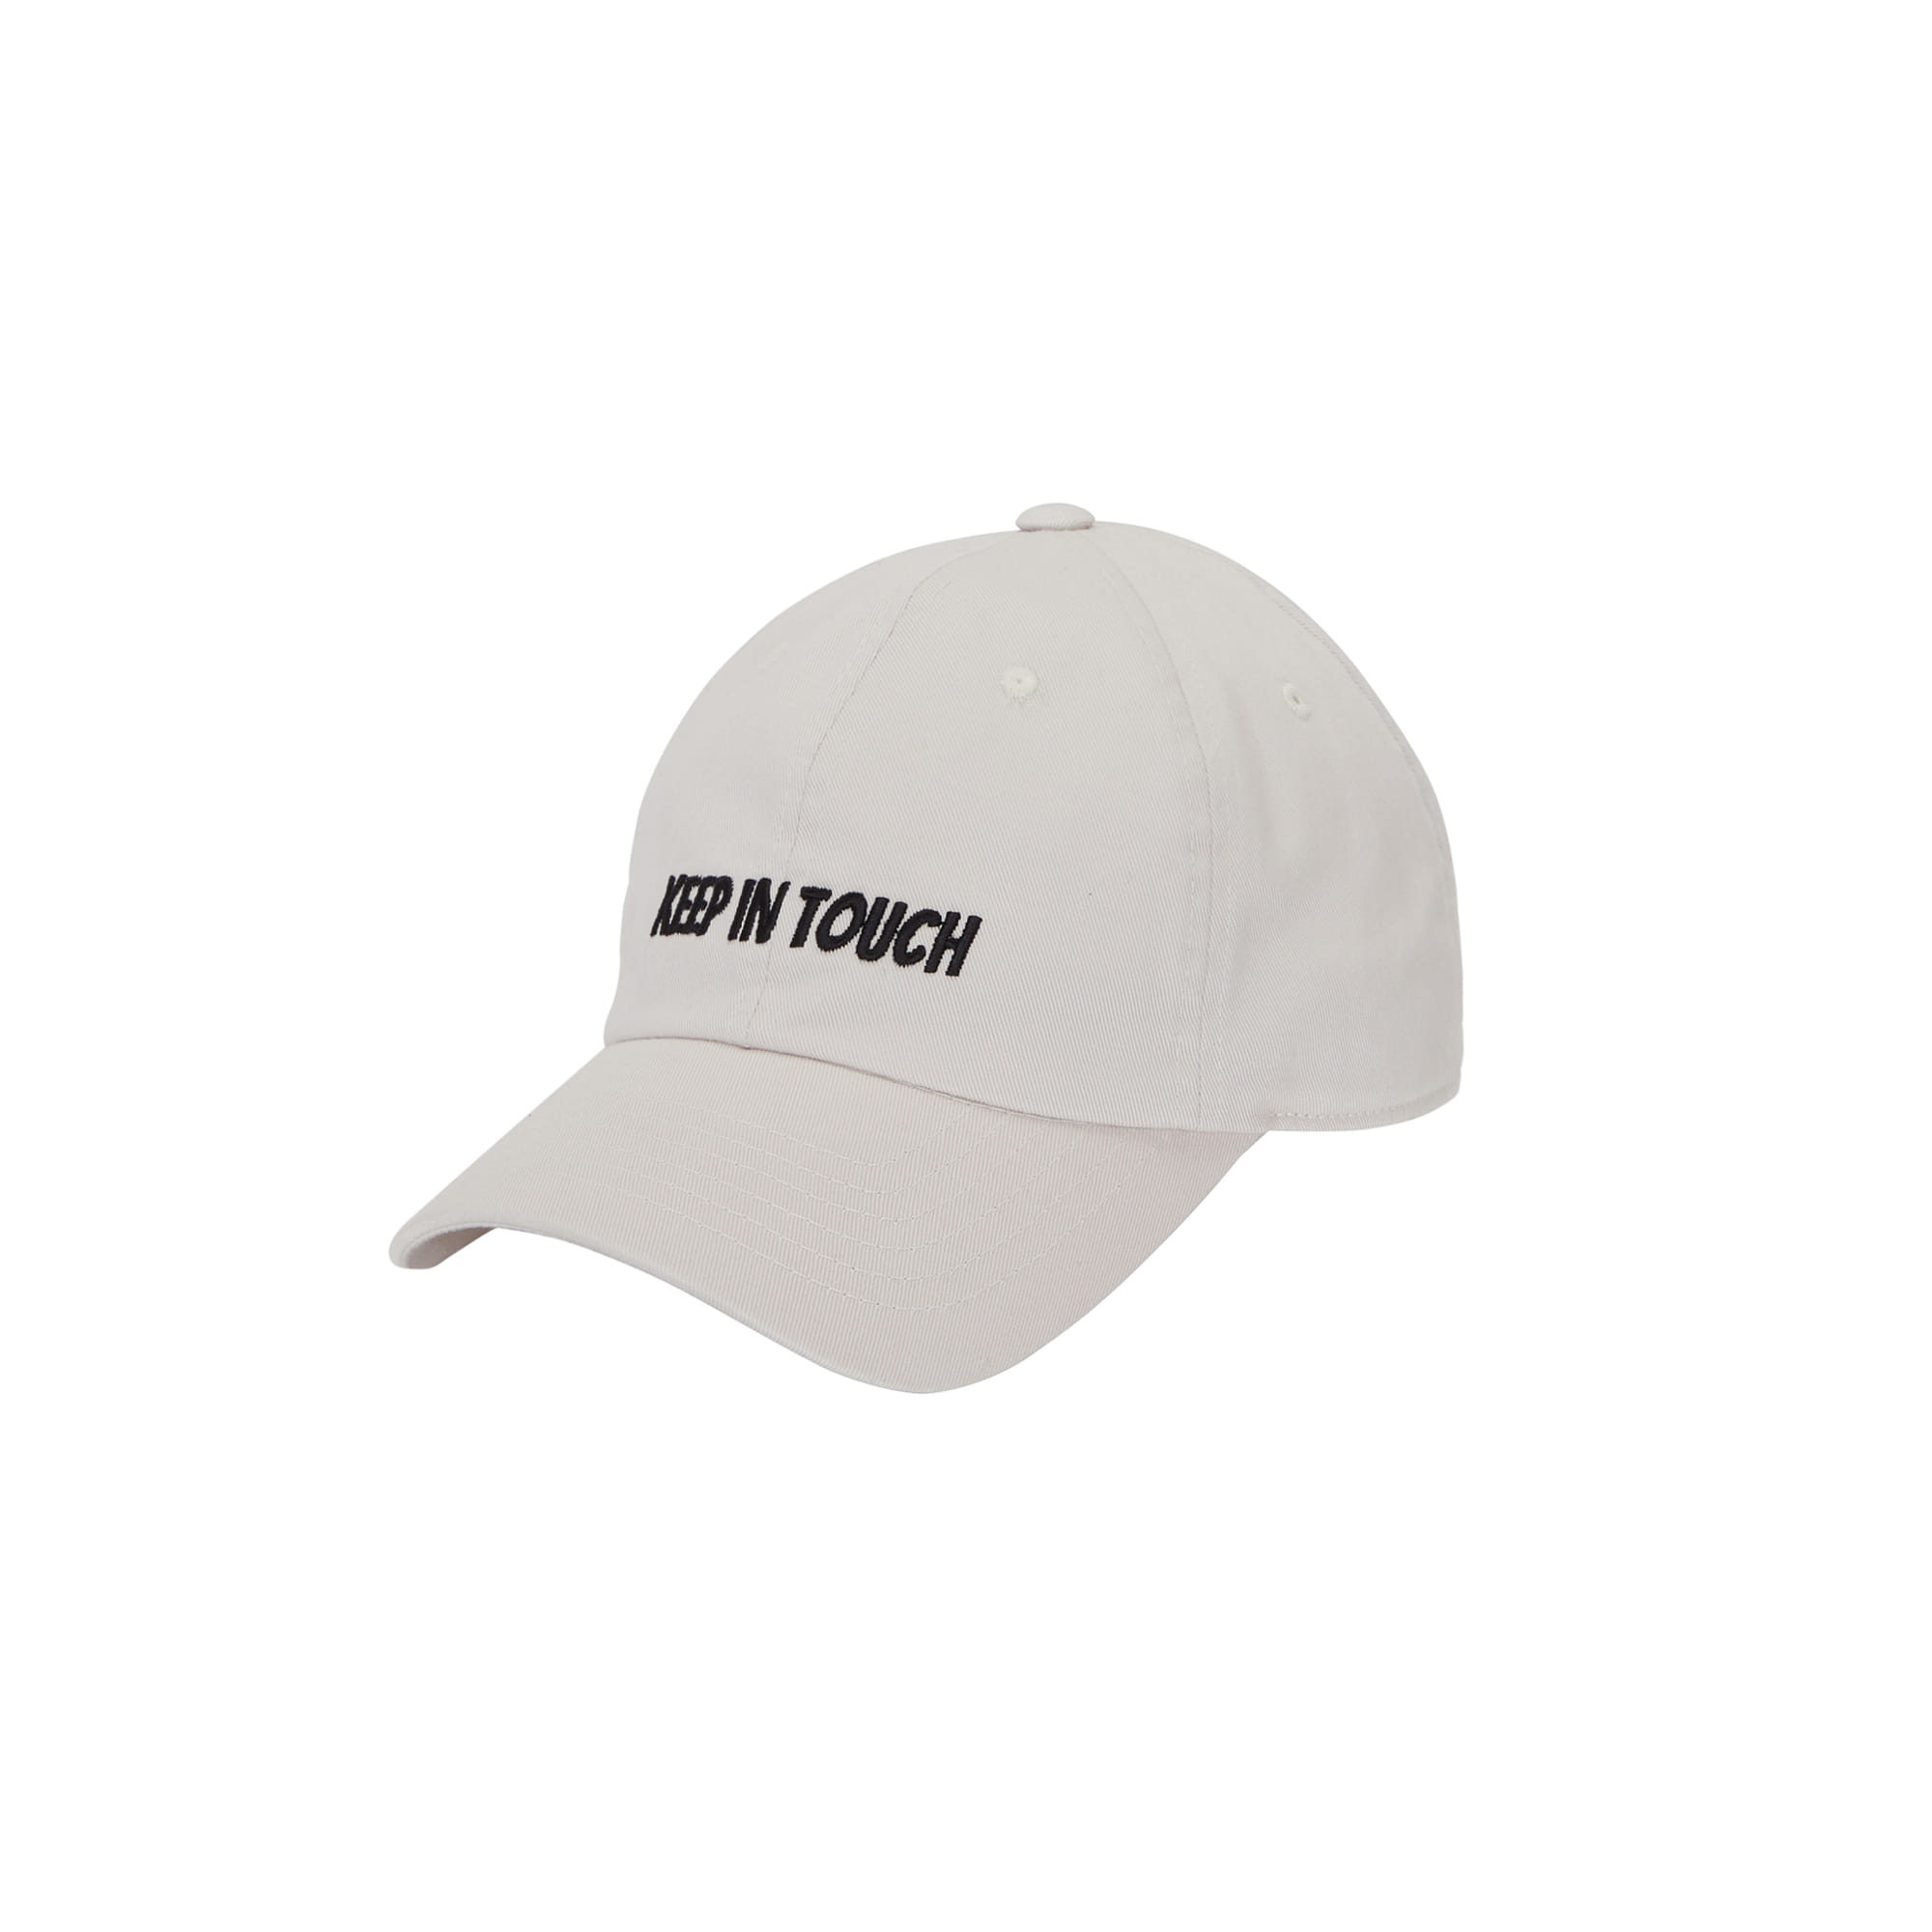 Keep In Touch Ball Cap (킵 인 터치 볼캡) Ivory